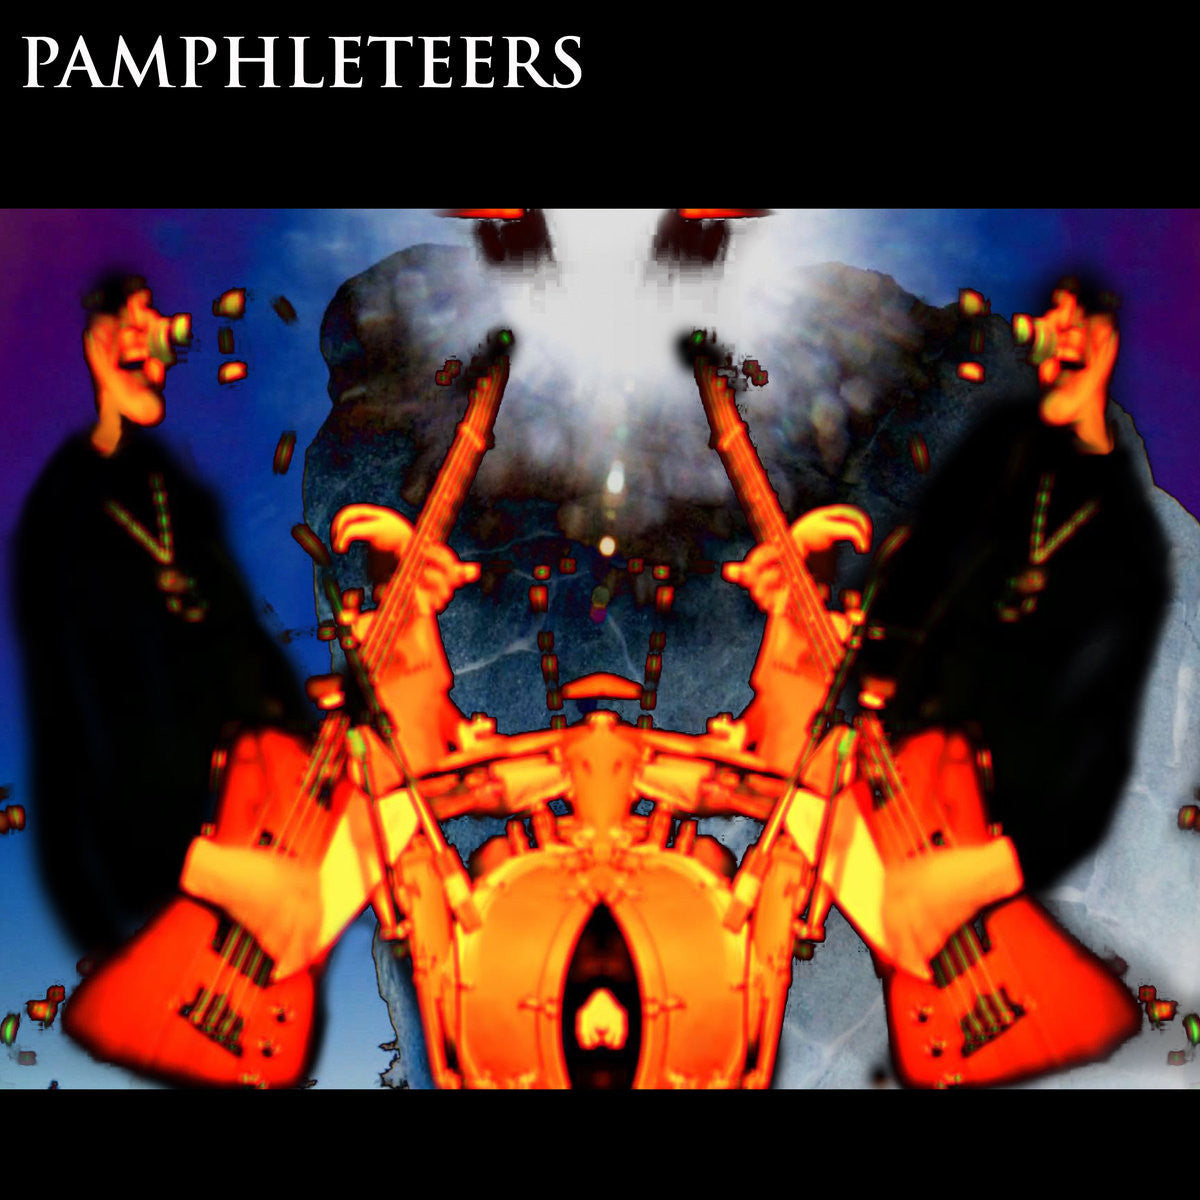 The Pamphleteers - The Ghost That Follows - New Vinyl 2016 LP + Download - Chicago, IL Post-Punk / New Wave / Psychedelia